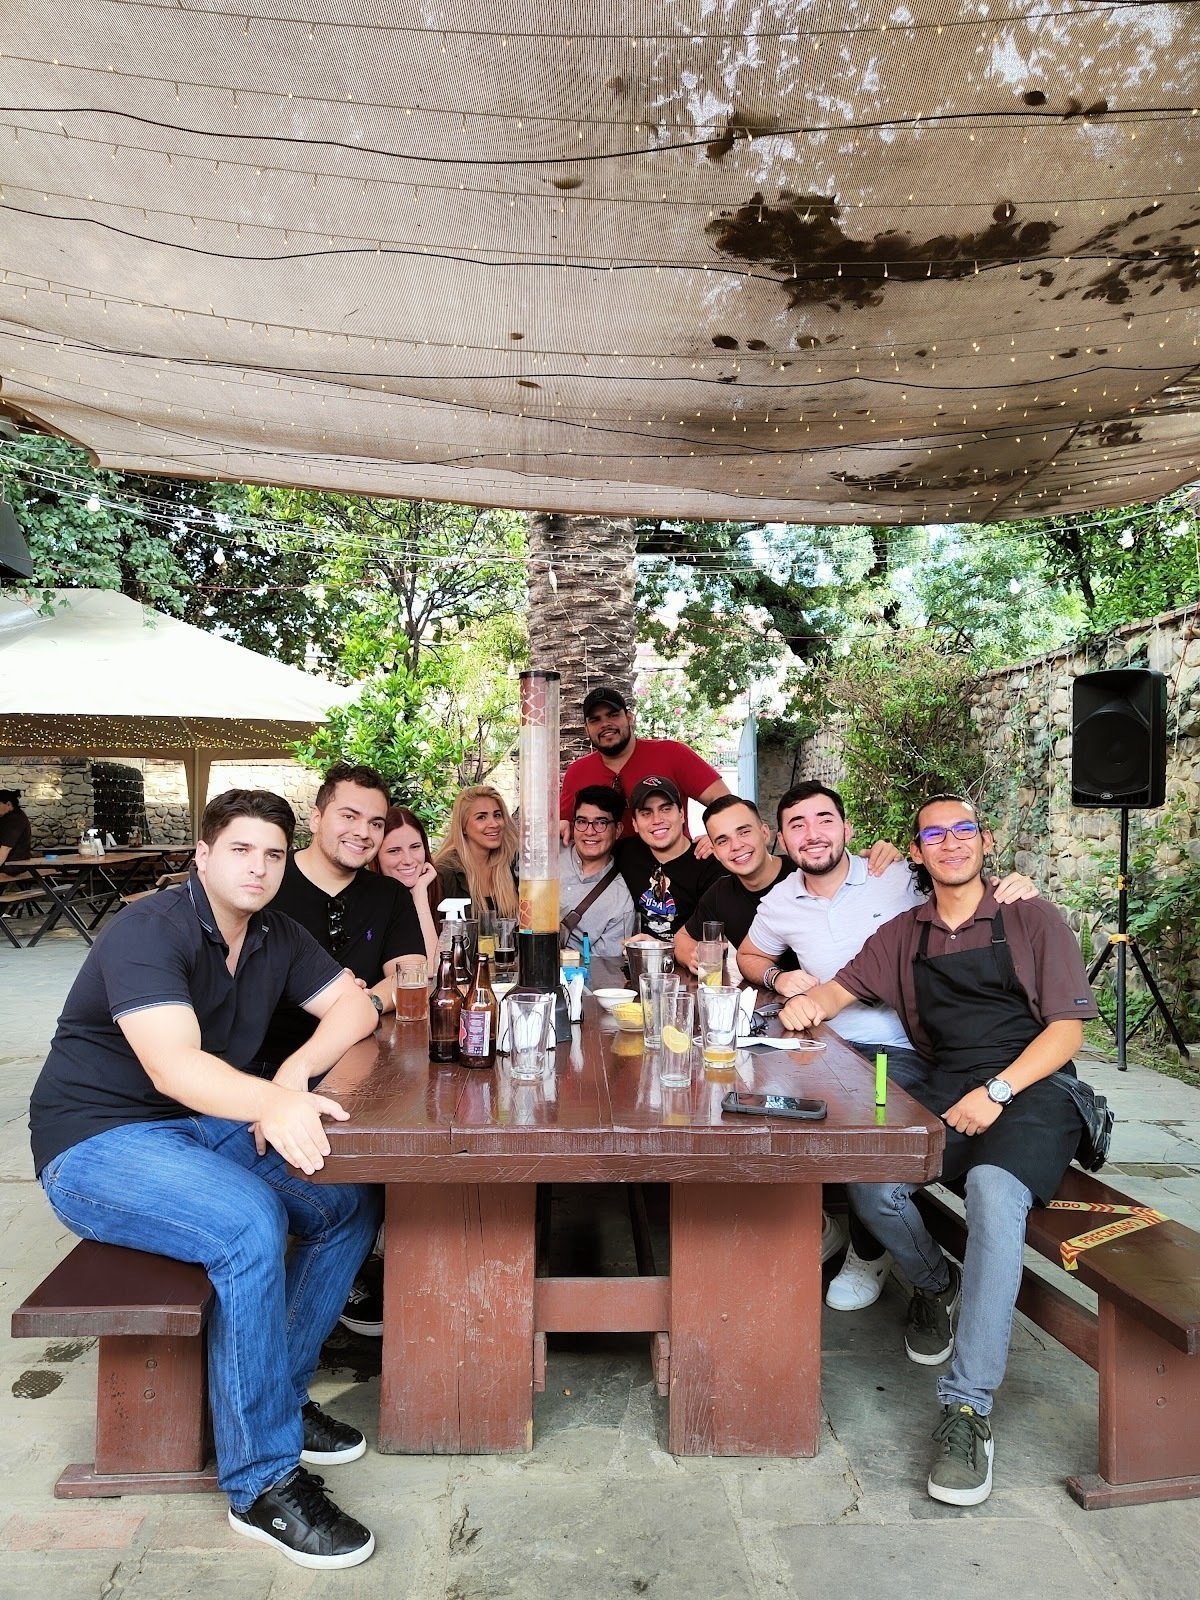 <span class="translation_missing" title="translation missing: en.meta.location_title, location_name: Tarija Beer Garden, city: Tarija">Location Title</span>